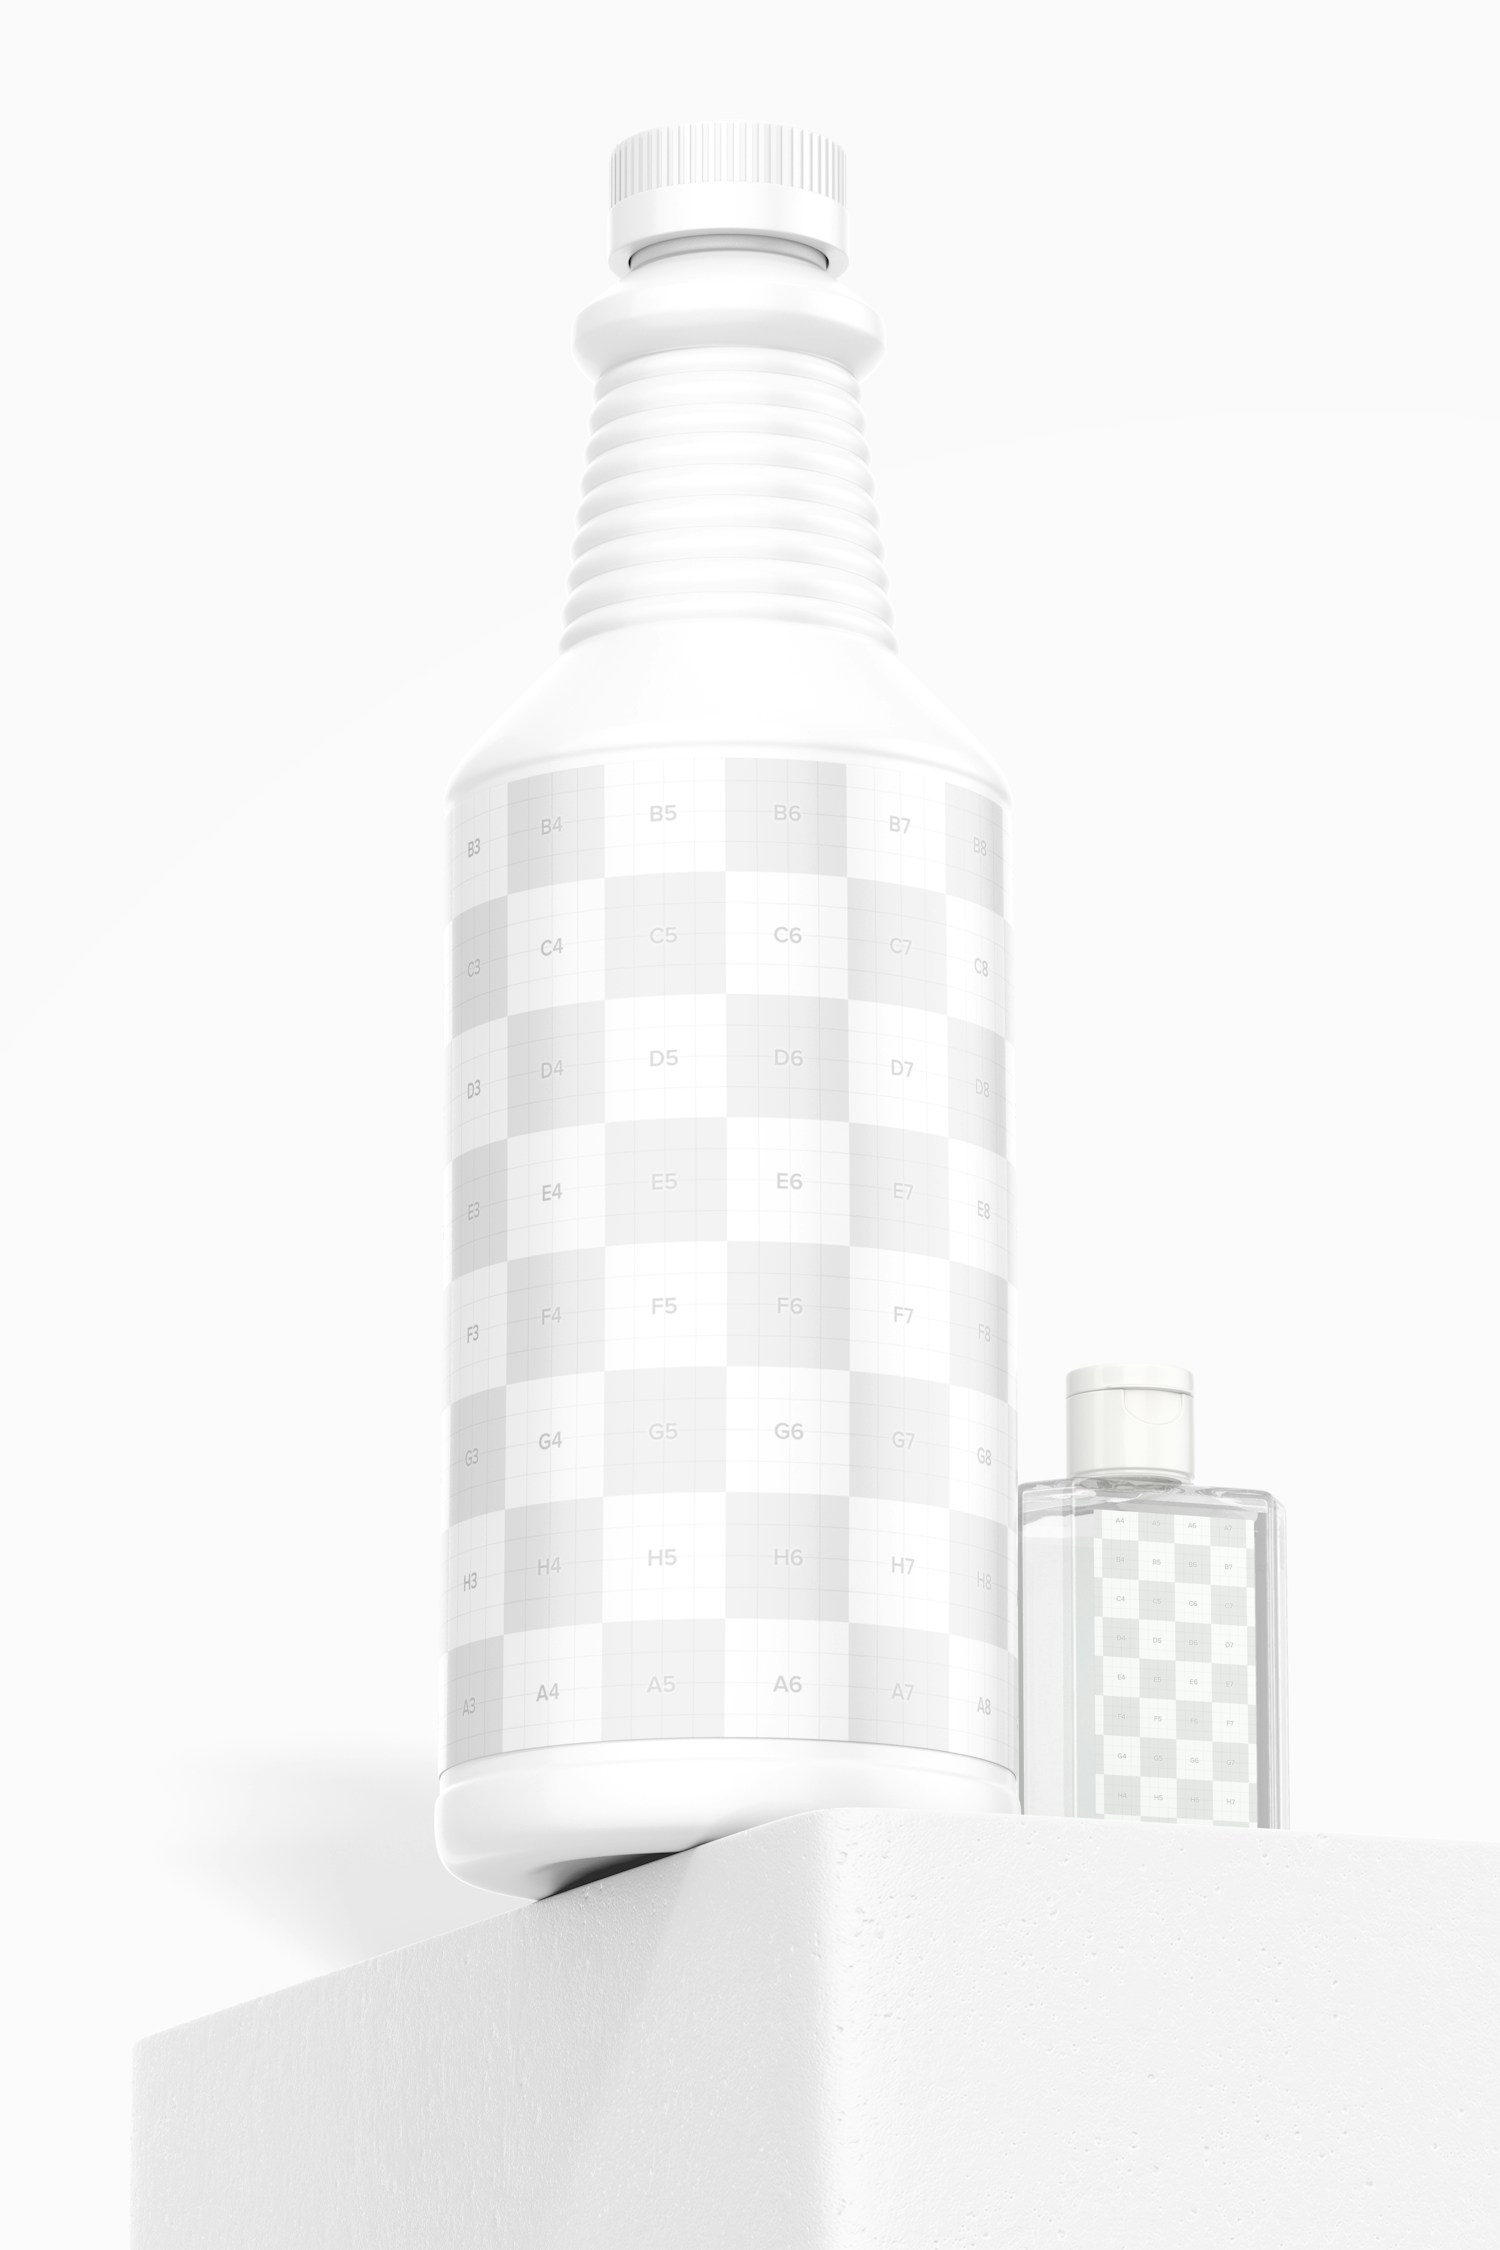 32 oz Medical Alcohol Bottle Mockup, Low Angle View